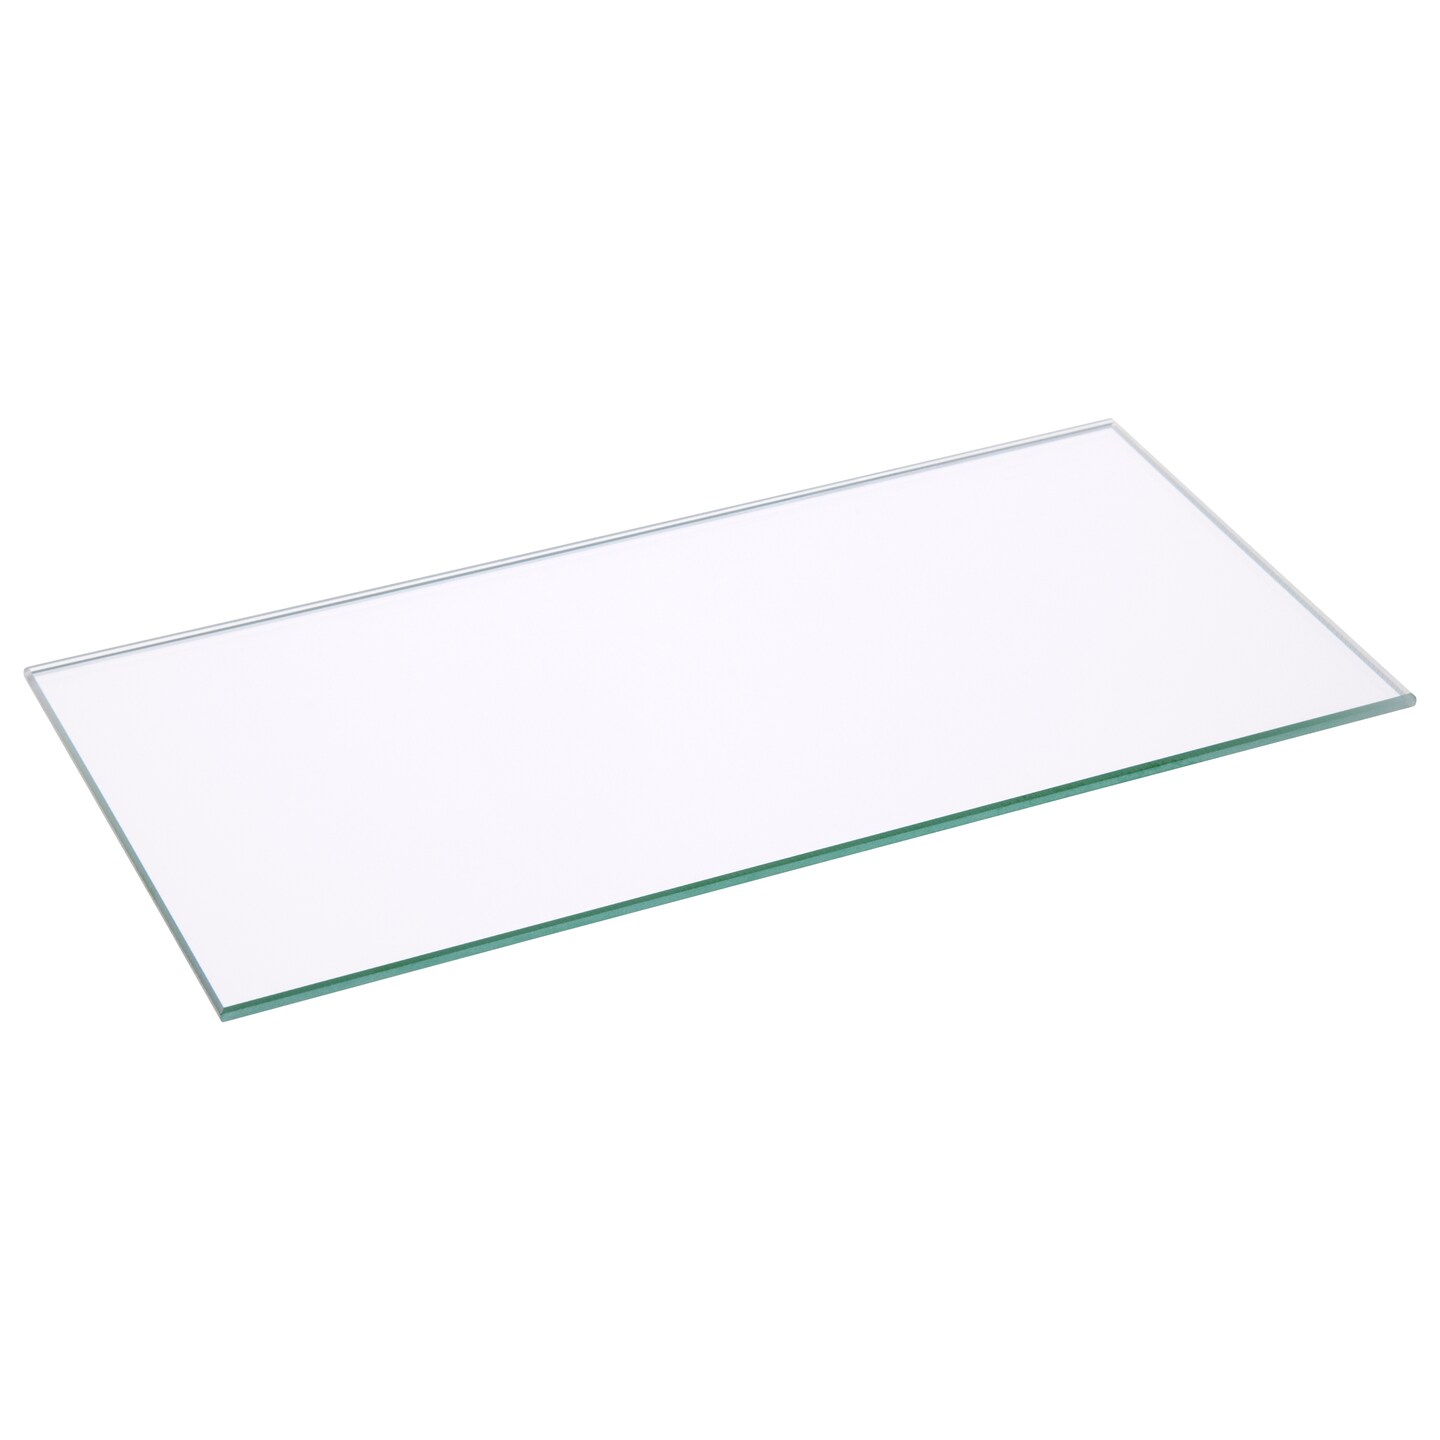 Plymor Rectangle 3mm Non-Beveled Glass Mirror, 4 inch x 8 inch